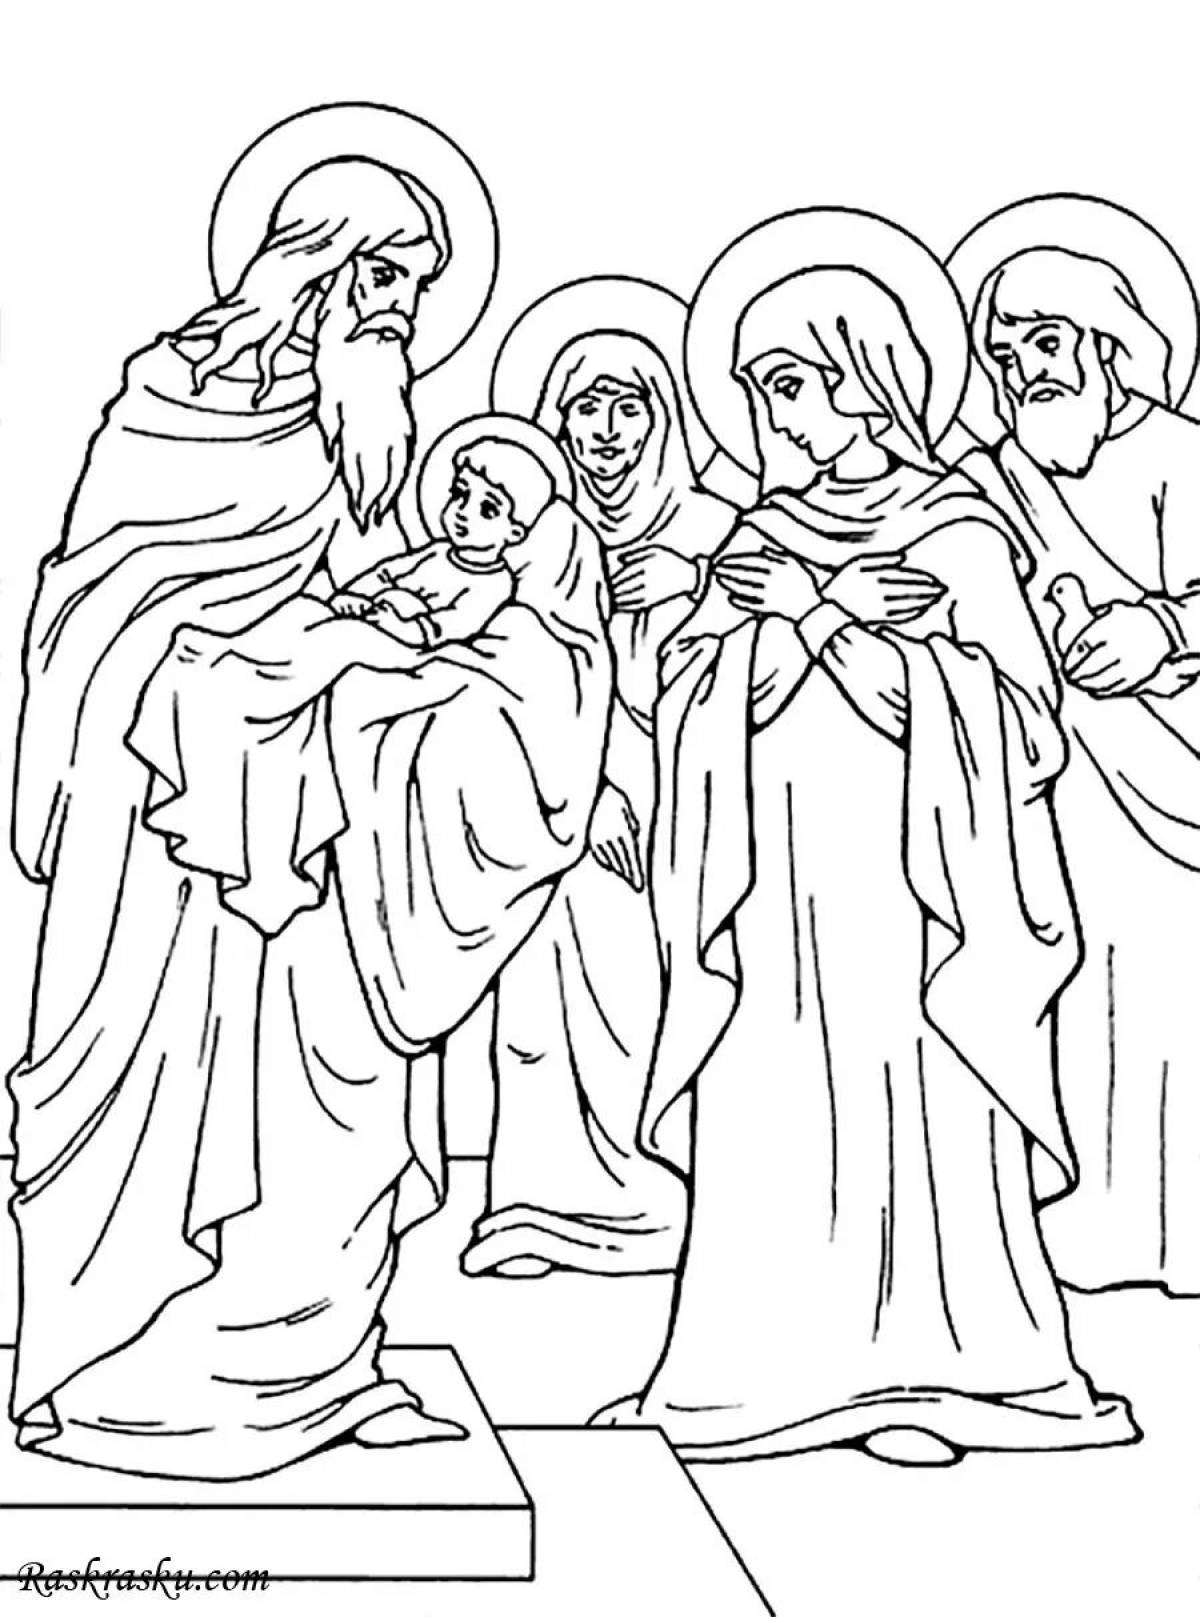 Coloring page prosperous meeting of the lord